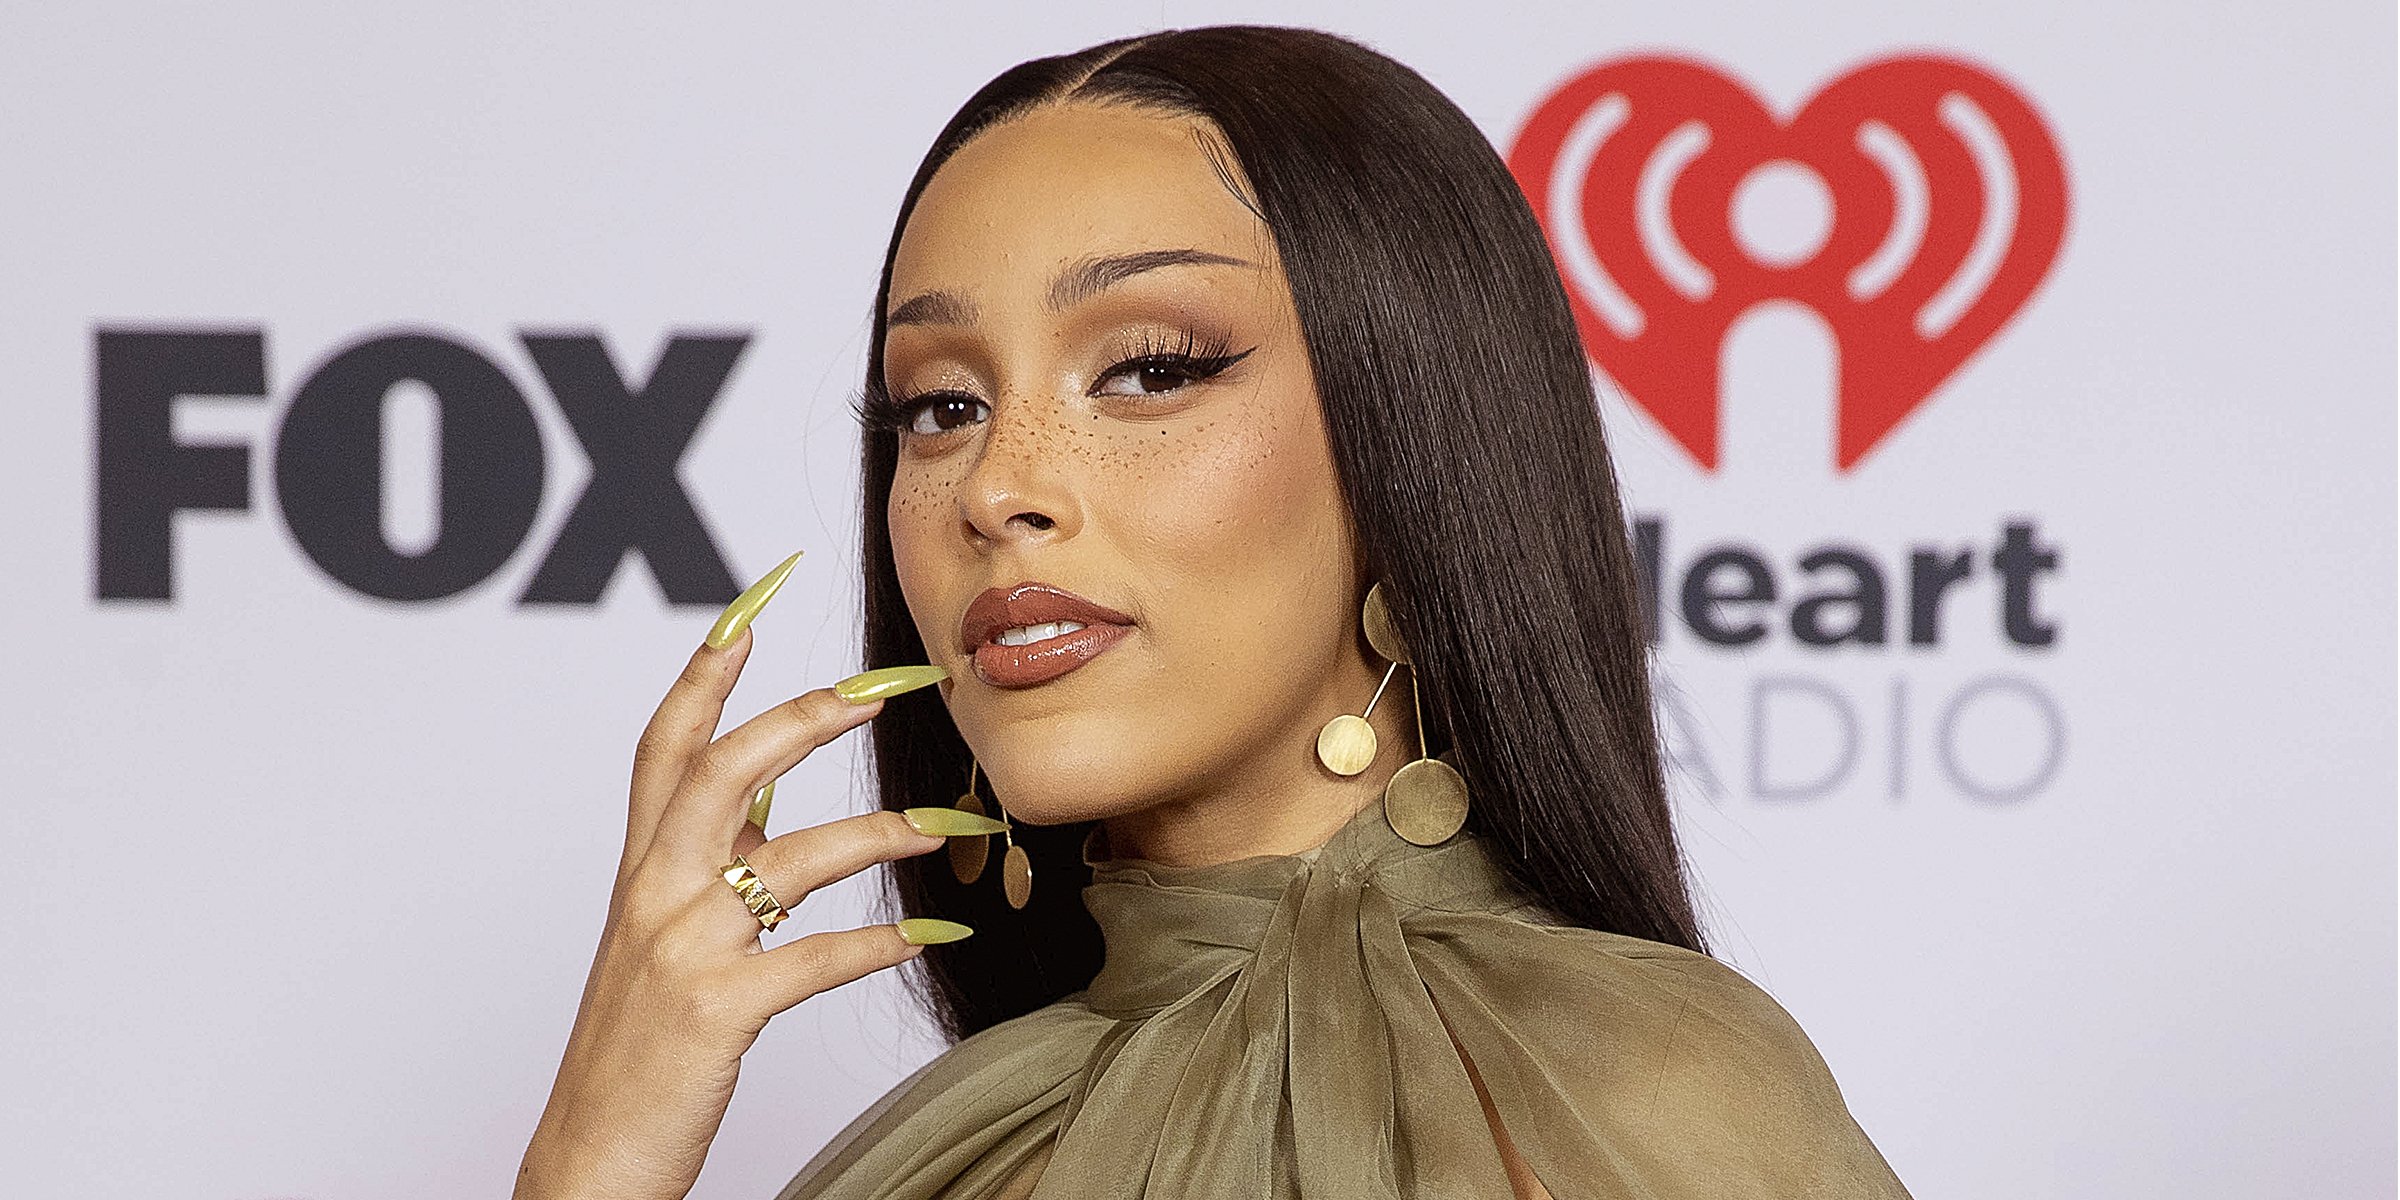 Who are Doja Cat's parents? - 22 facts you need to know about